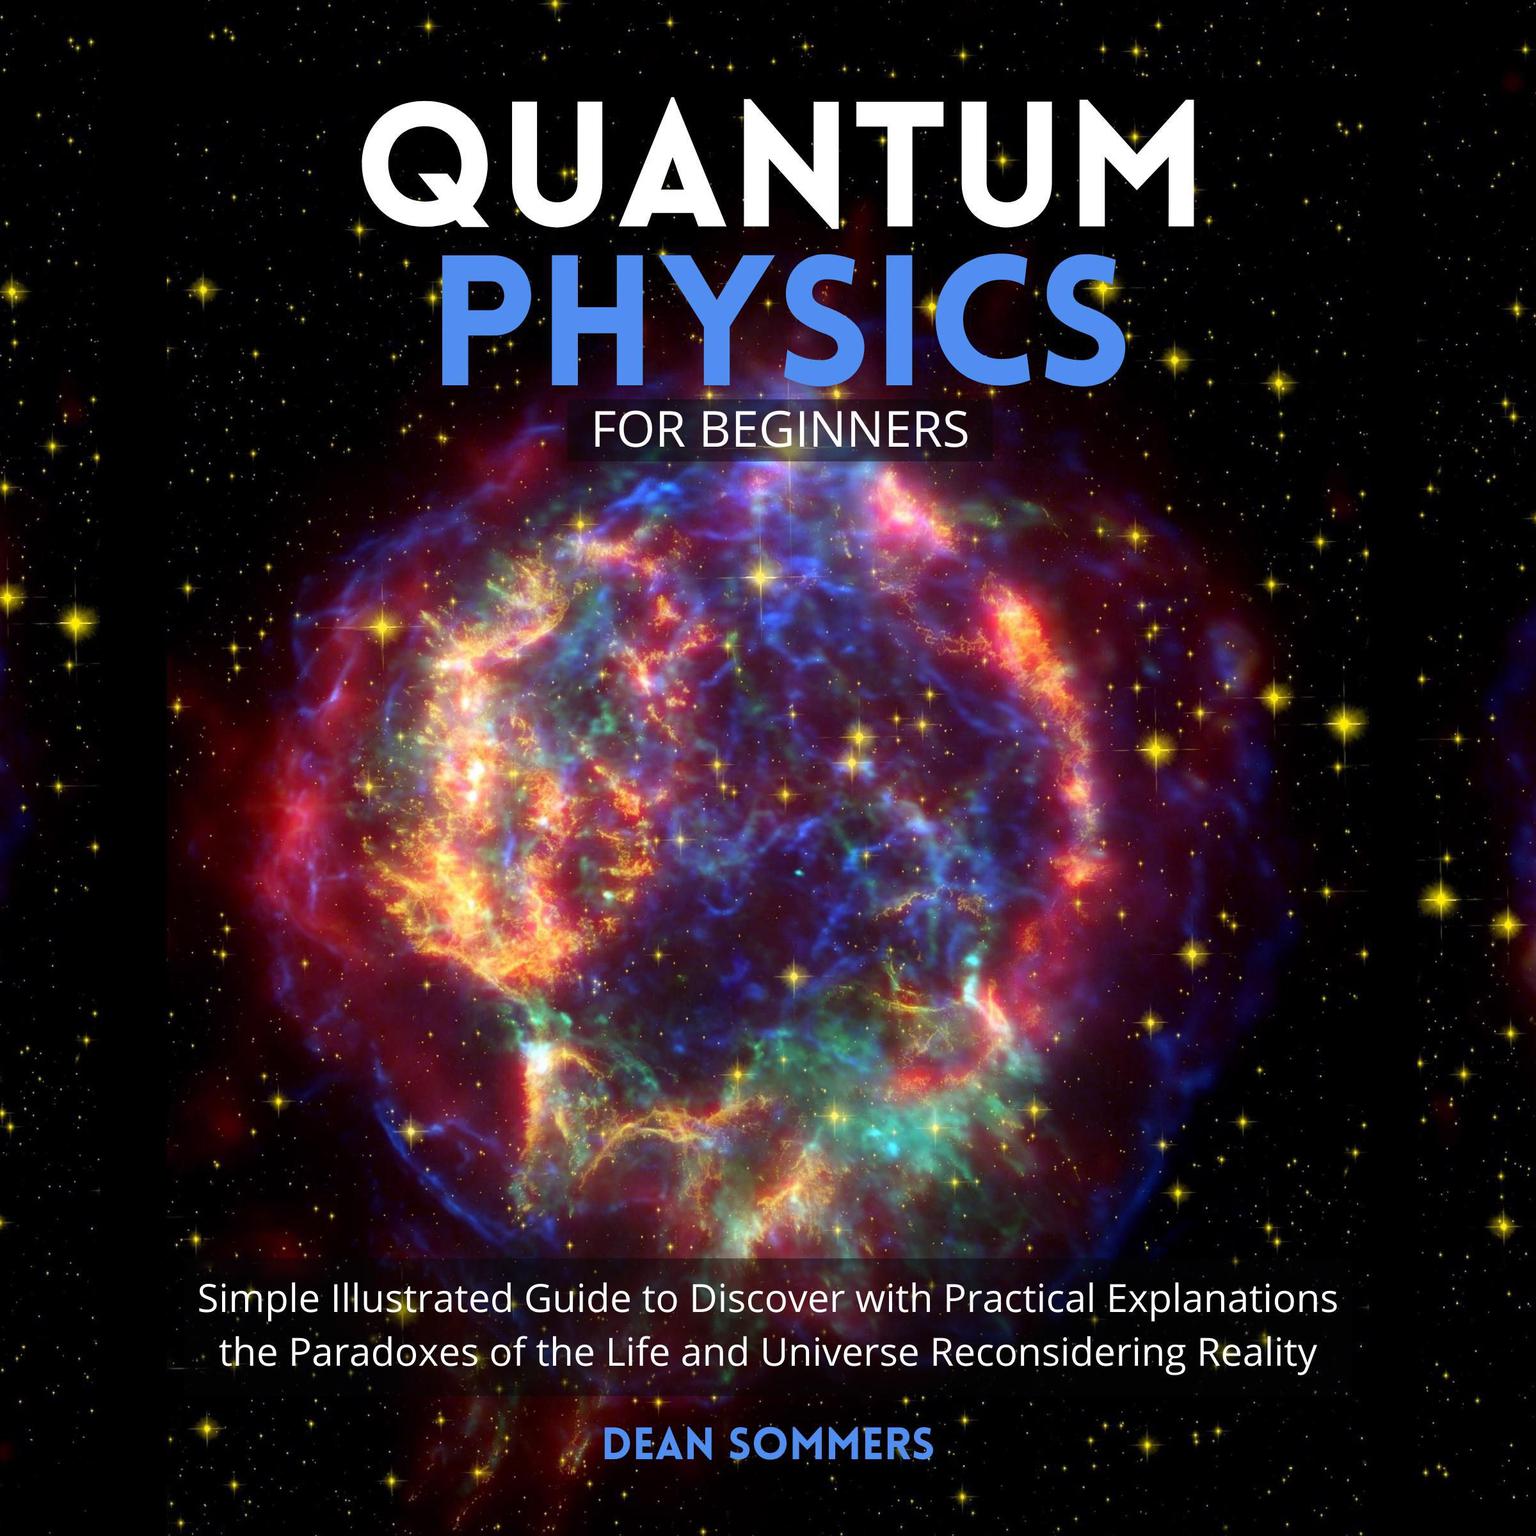 Quantum Physics for Beginners: Simple Illustrated Guide to Discover with Practical Explanations the Paradoxes of the Life and Universe Reconsidering Reality Audiobook, by Dean Sommers